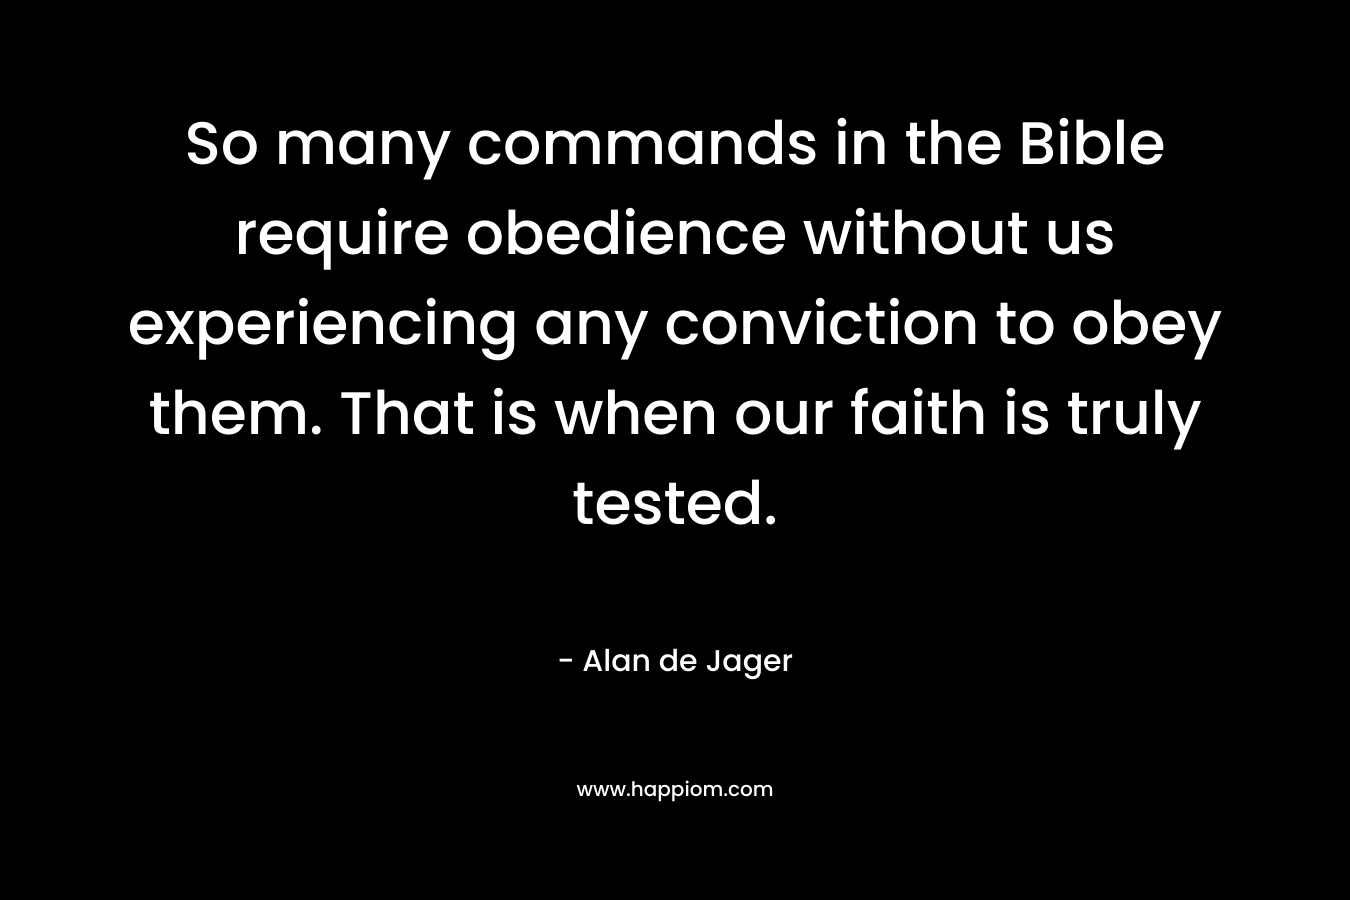 So many commands in the Bible require obedience without us experiencing any conviction to obey them. That is when our faith is truly tested.